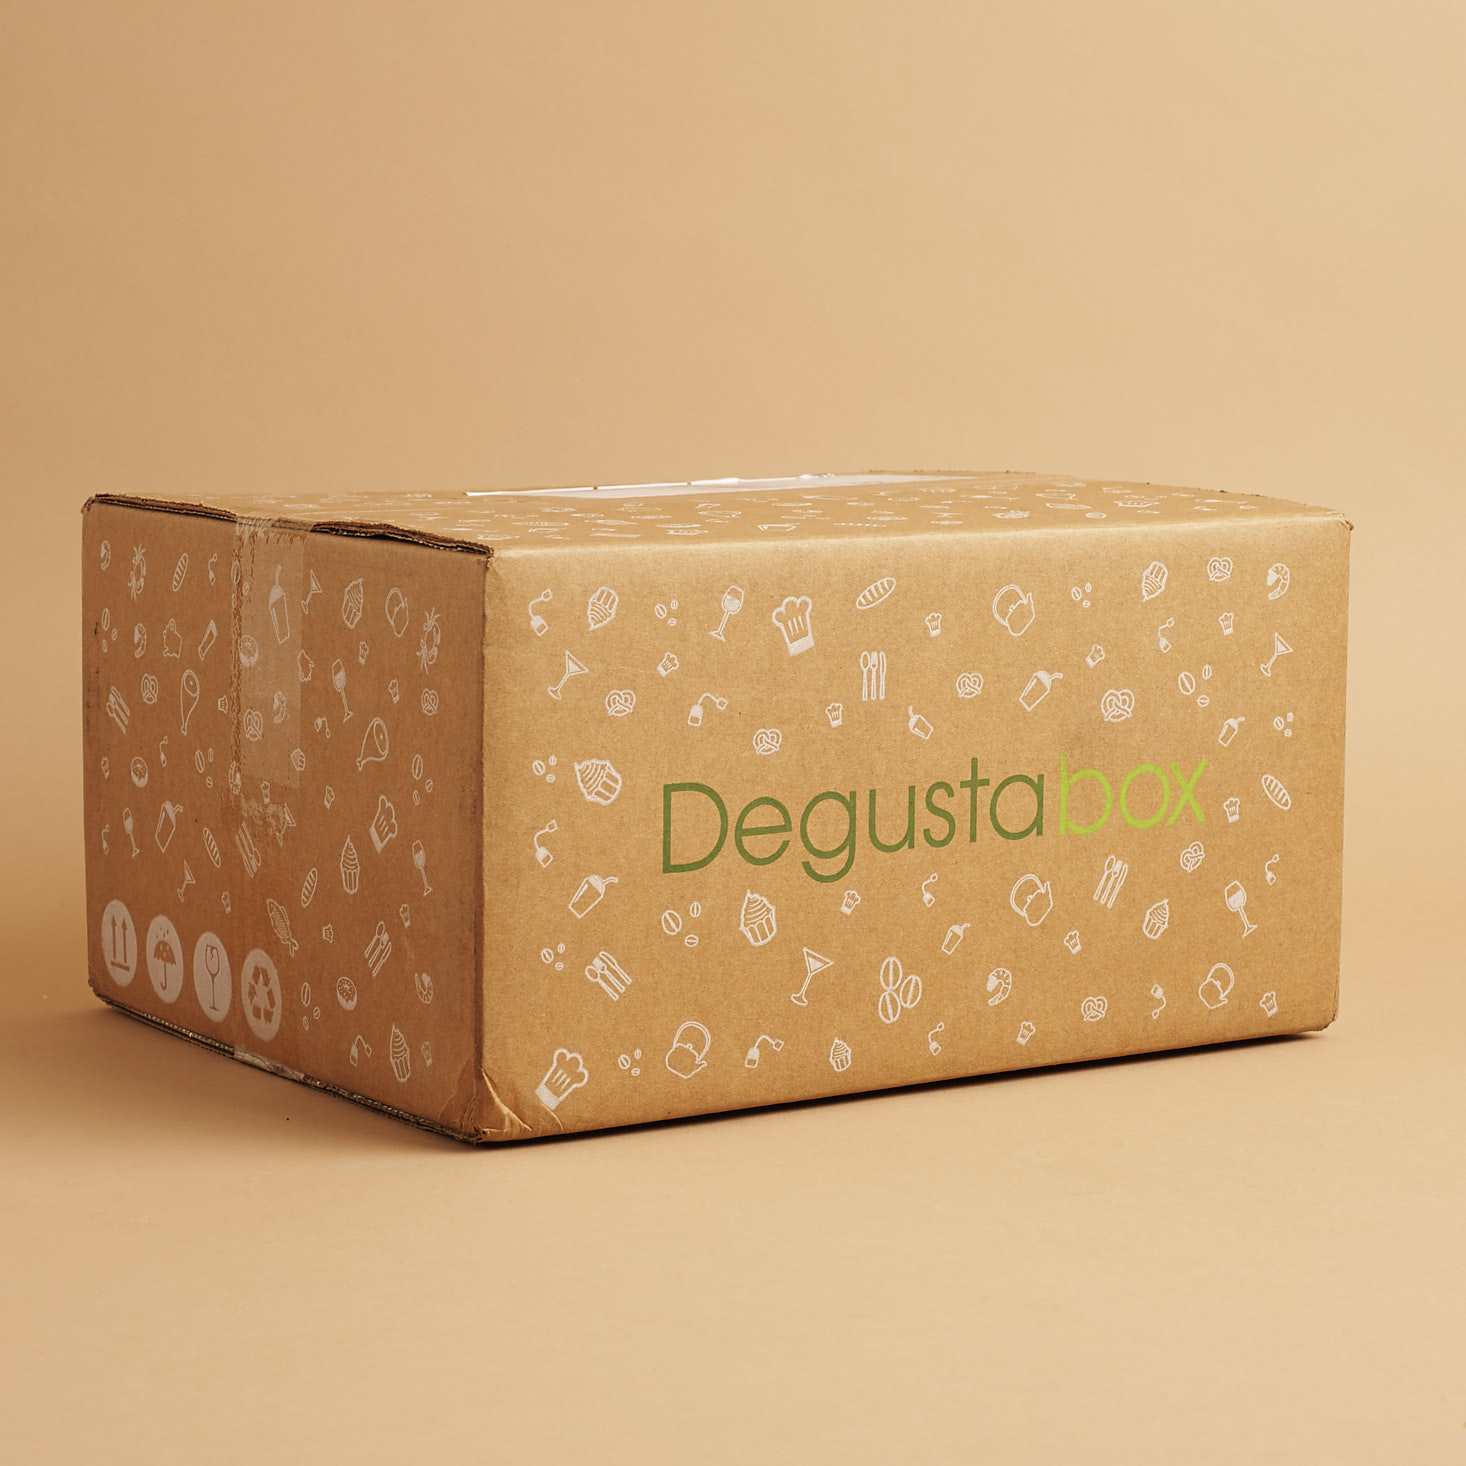 Degustabox Food Subscription Review + Coupon – September 2018